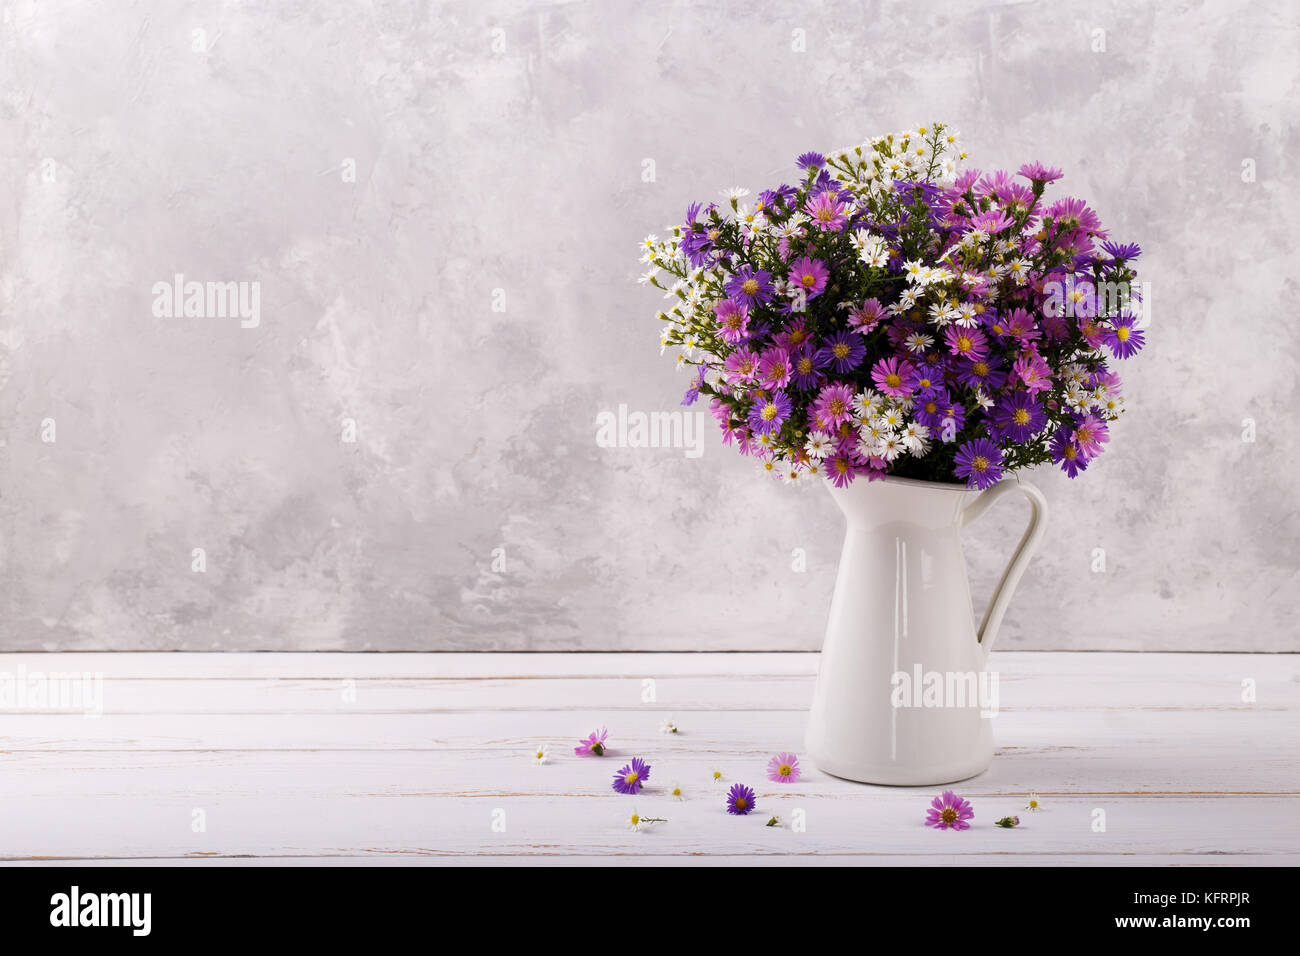 Bouquet Of Colorful Aster Flowers In A Pitcher On White Vintage Background With Copy Space Stock Photo Alamy